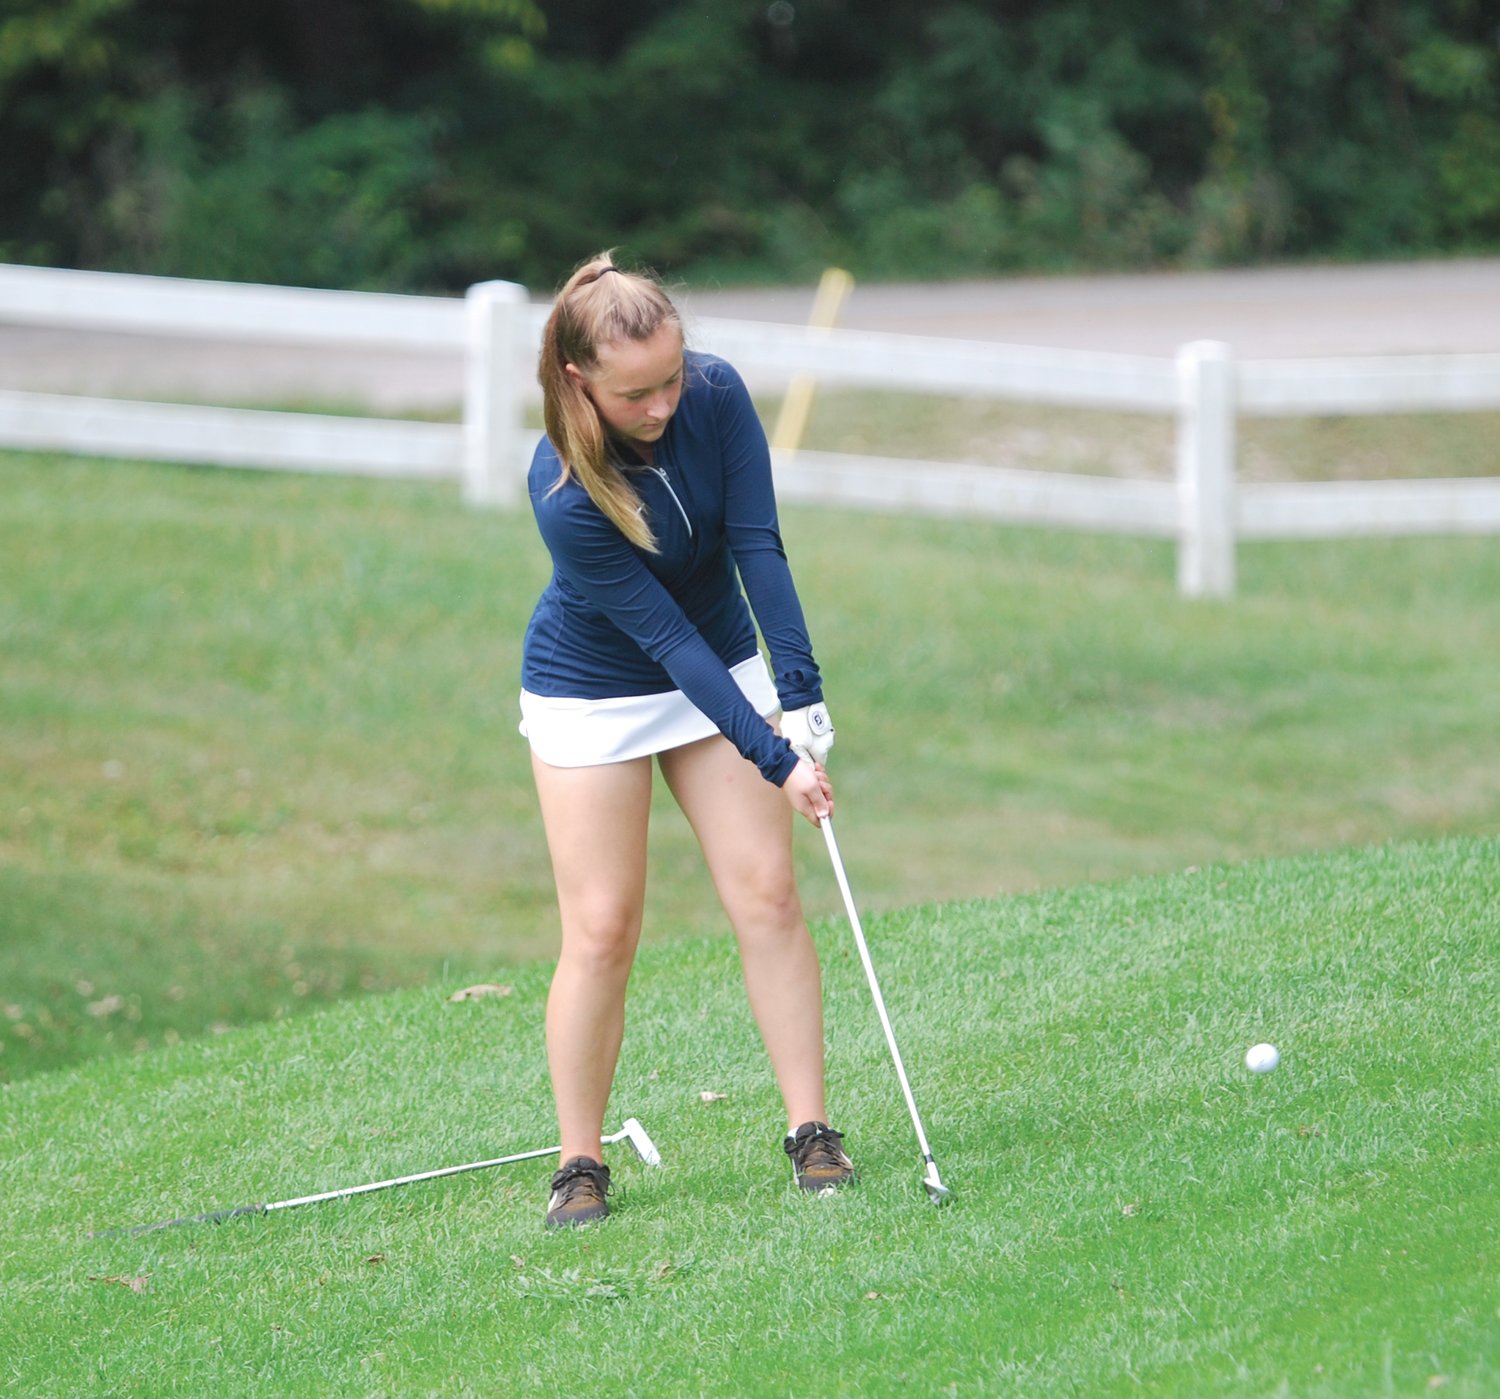 North Montgomery's Maggie Yeager chips toward the green on No. 18 the Crawfordsville Country Club on Saturday.